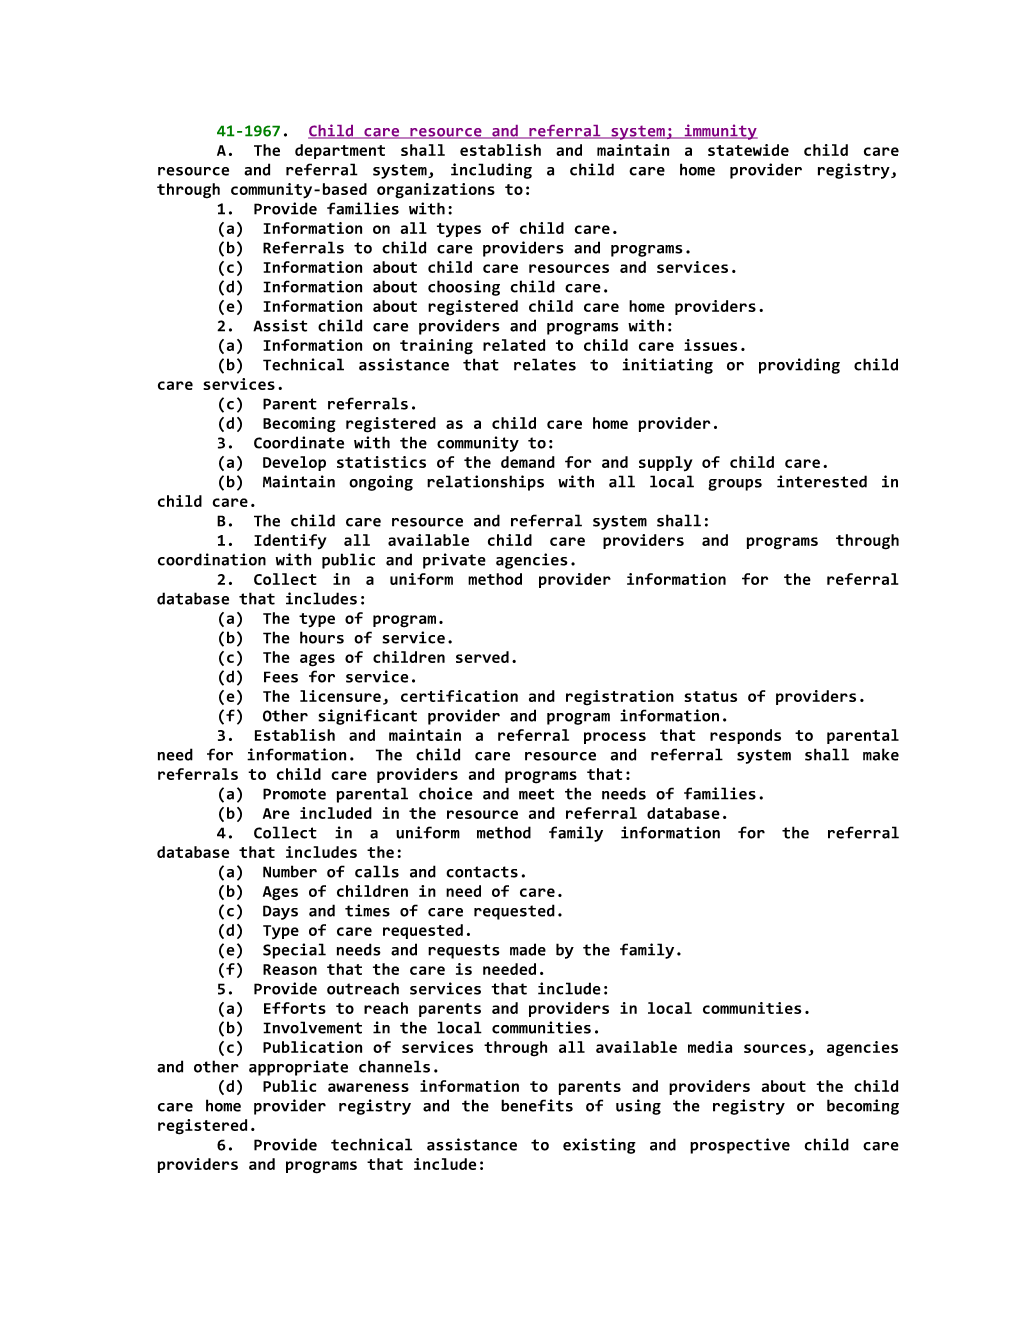 41-1967; Child Care Resource and Referral System; Immunity